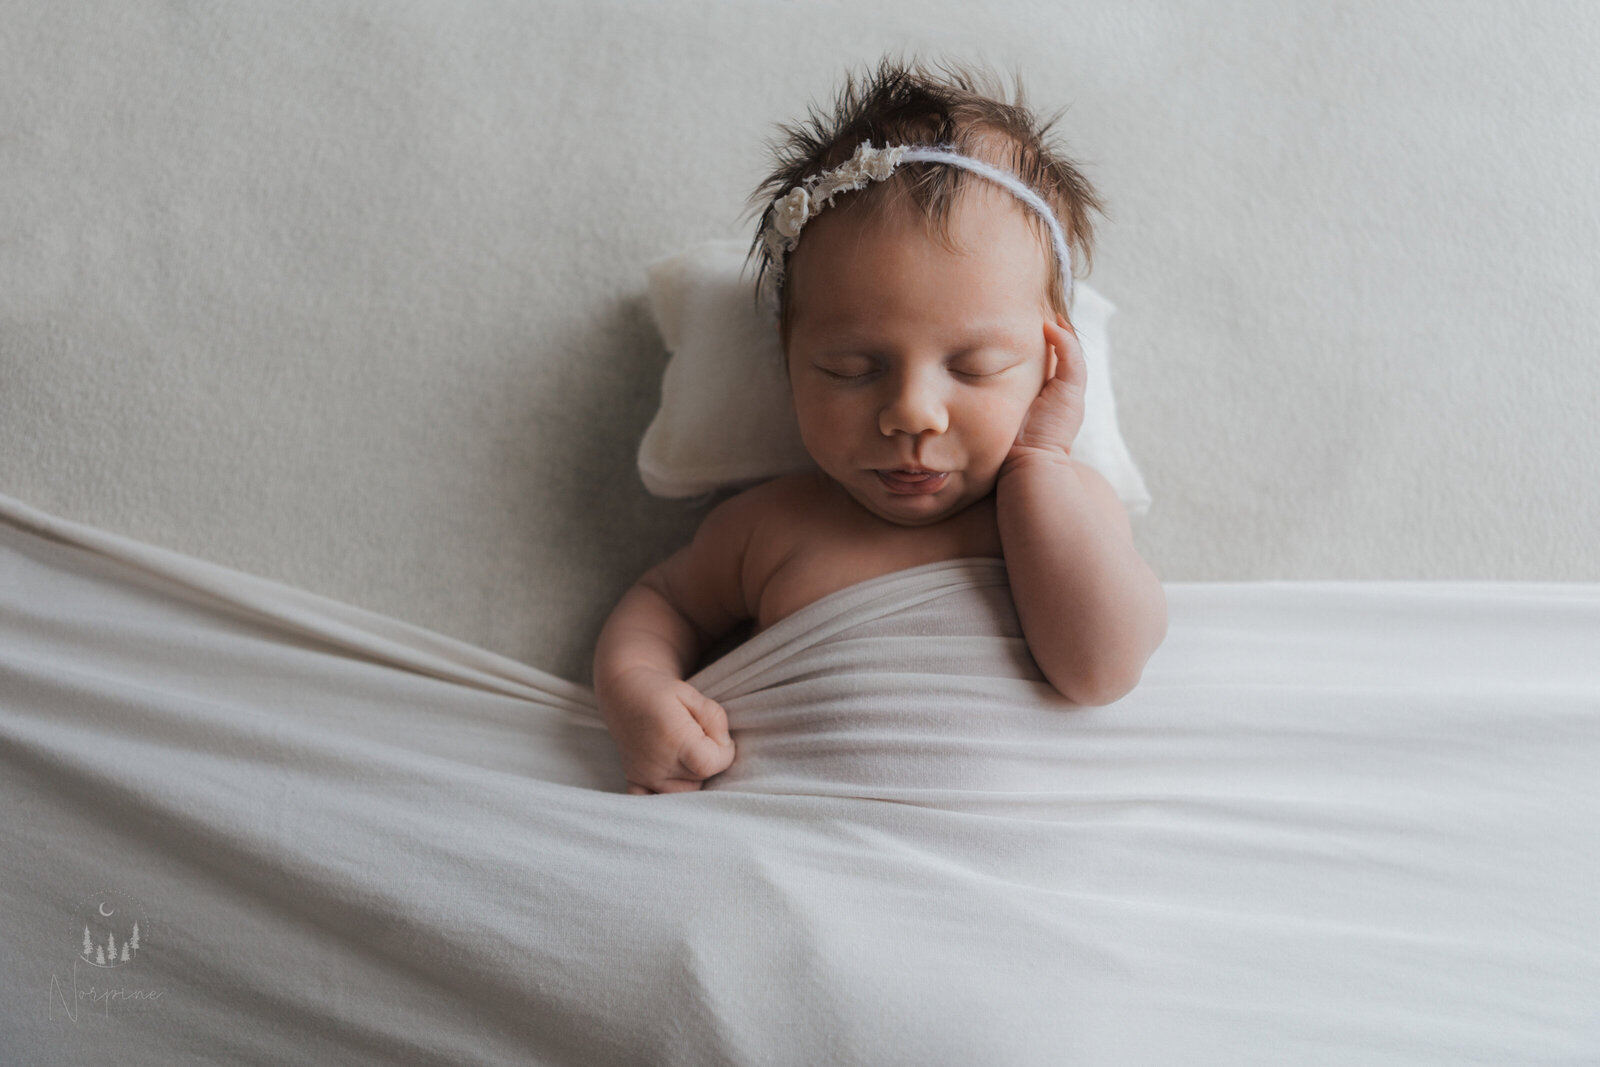 a newborn girl in the tucked in pose with a white background, blanket, and pillow, wearing a white headband. She is holding her face with one hand, and pursing her lips with eyes closed.